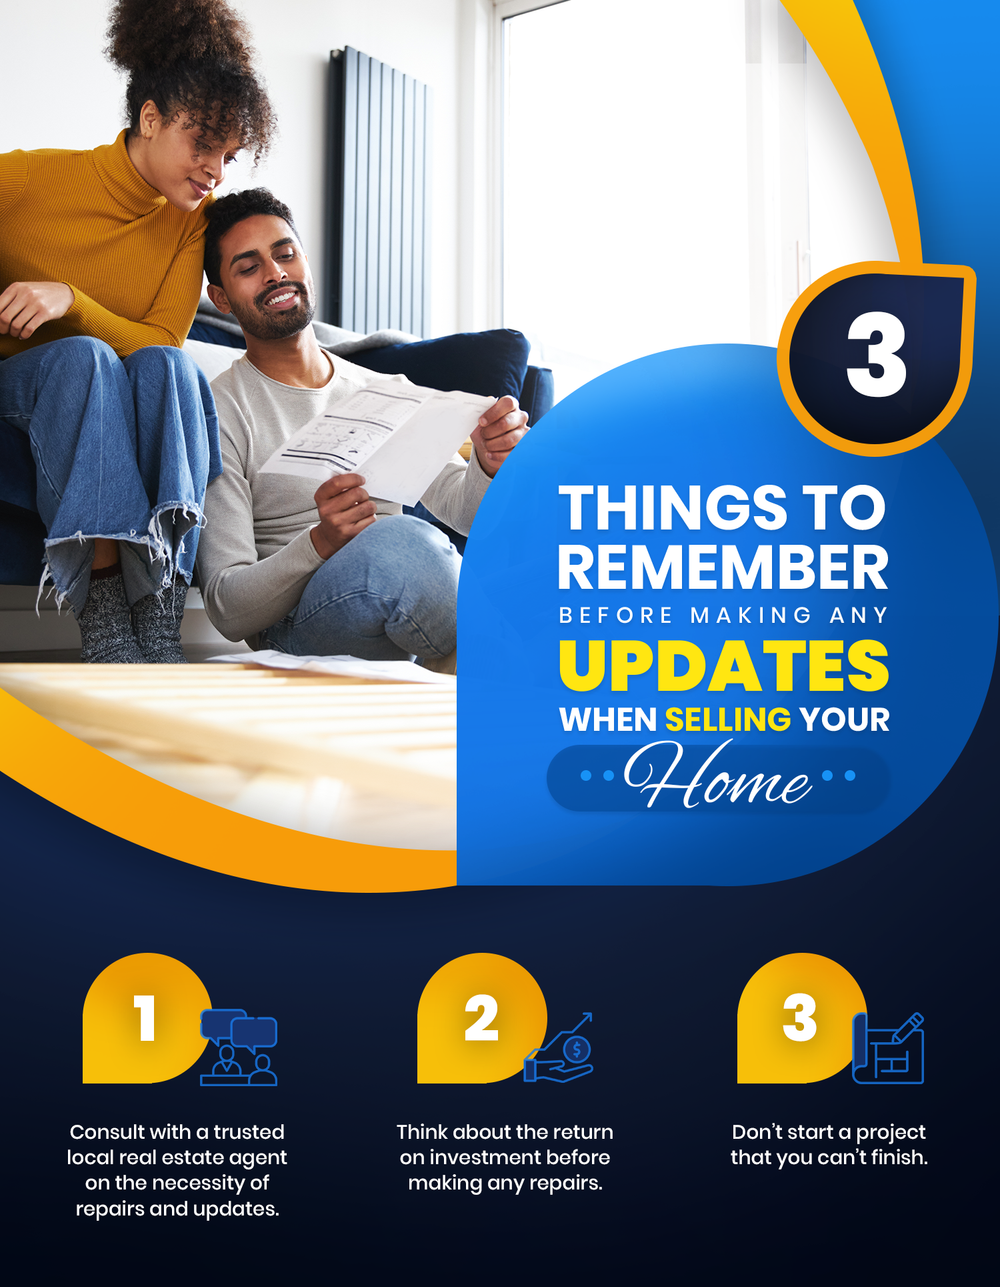 3 initial steps to making updates when selling your home